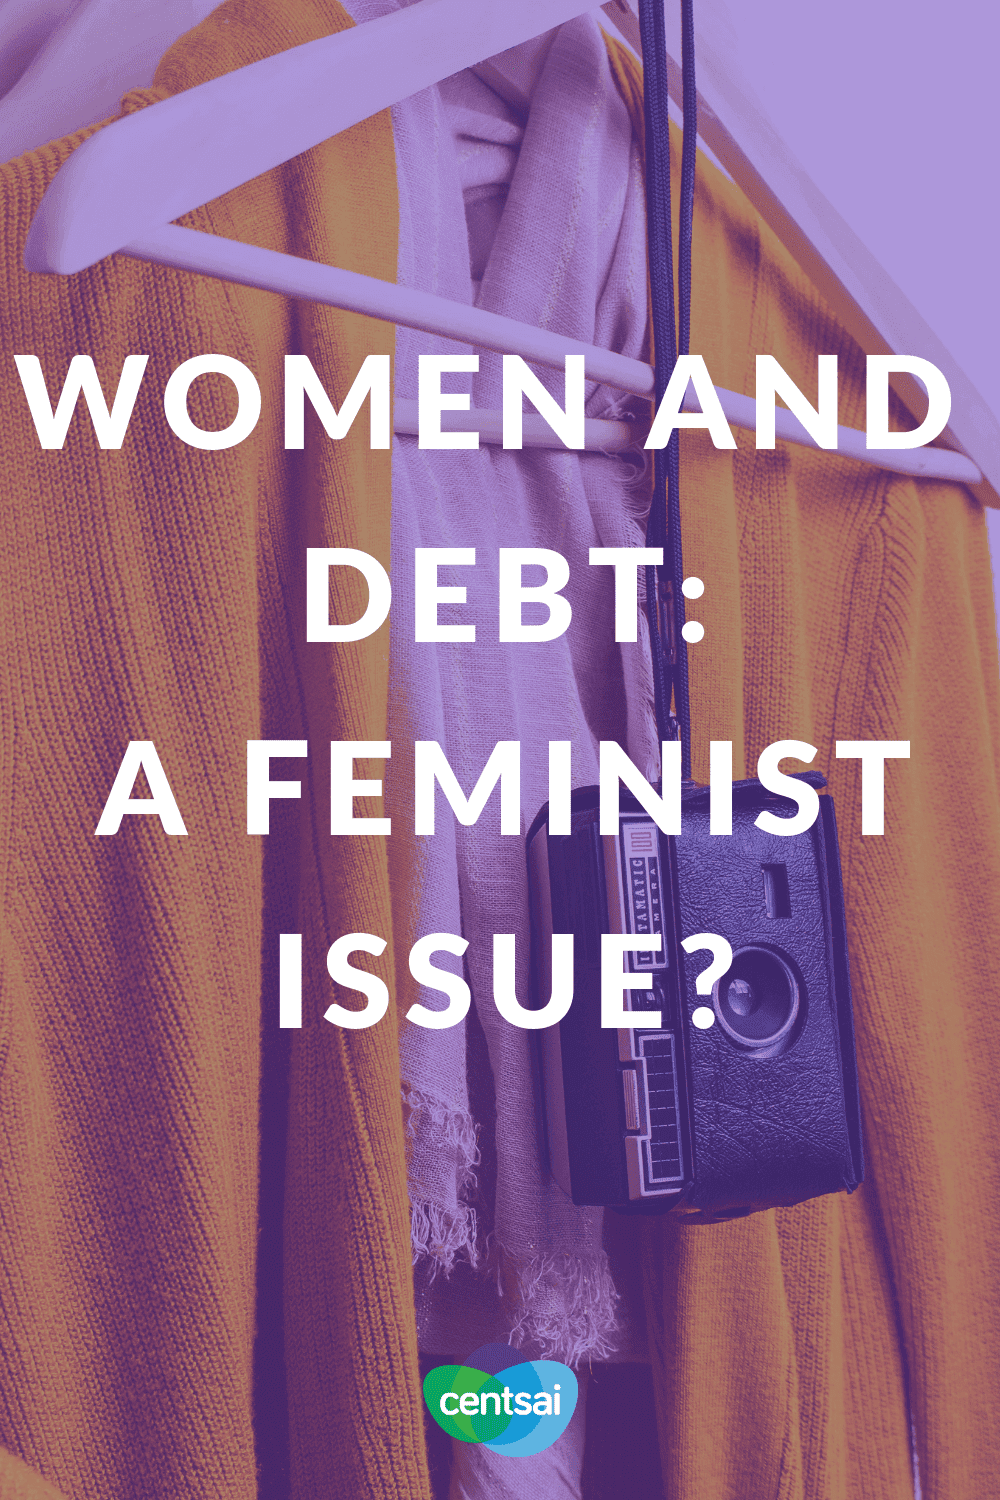 Women and Debt: A Feminist Issue?. Did you know that women are hit harder with debt than men? Check out the stats on women and debt and learn what they mean for you. #women #debt #financialplanning #feministissue